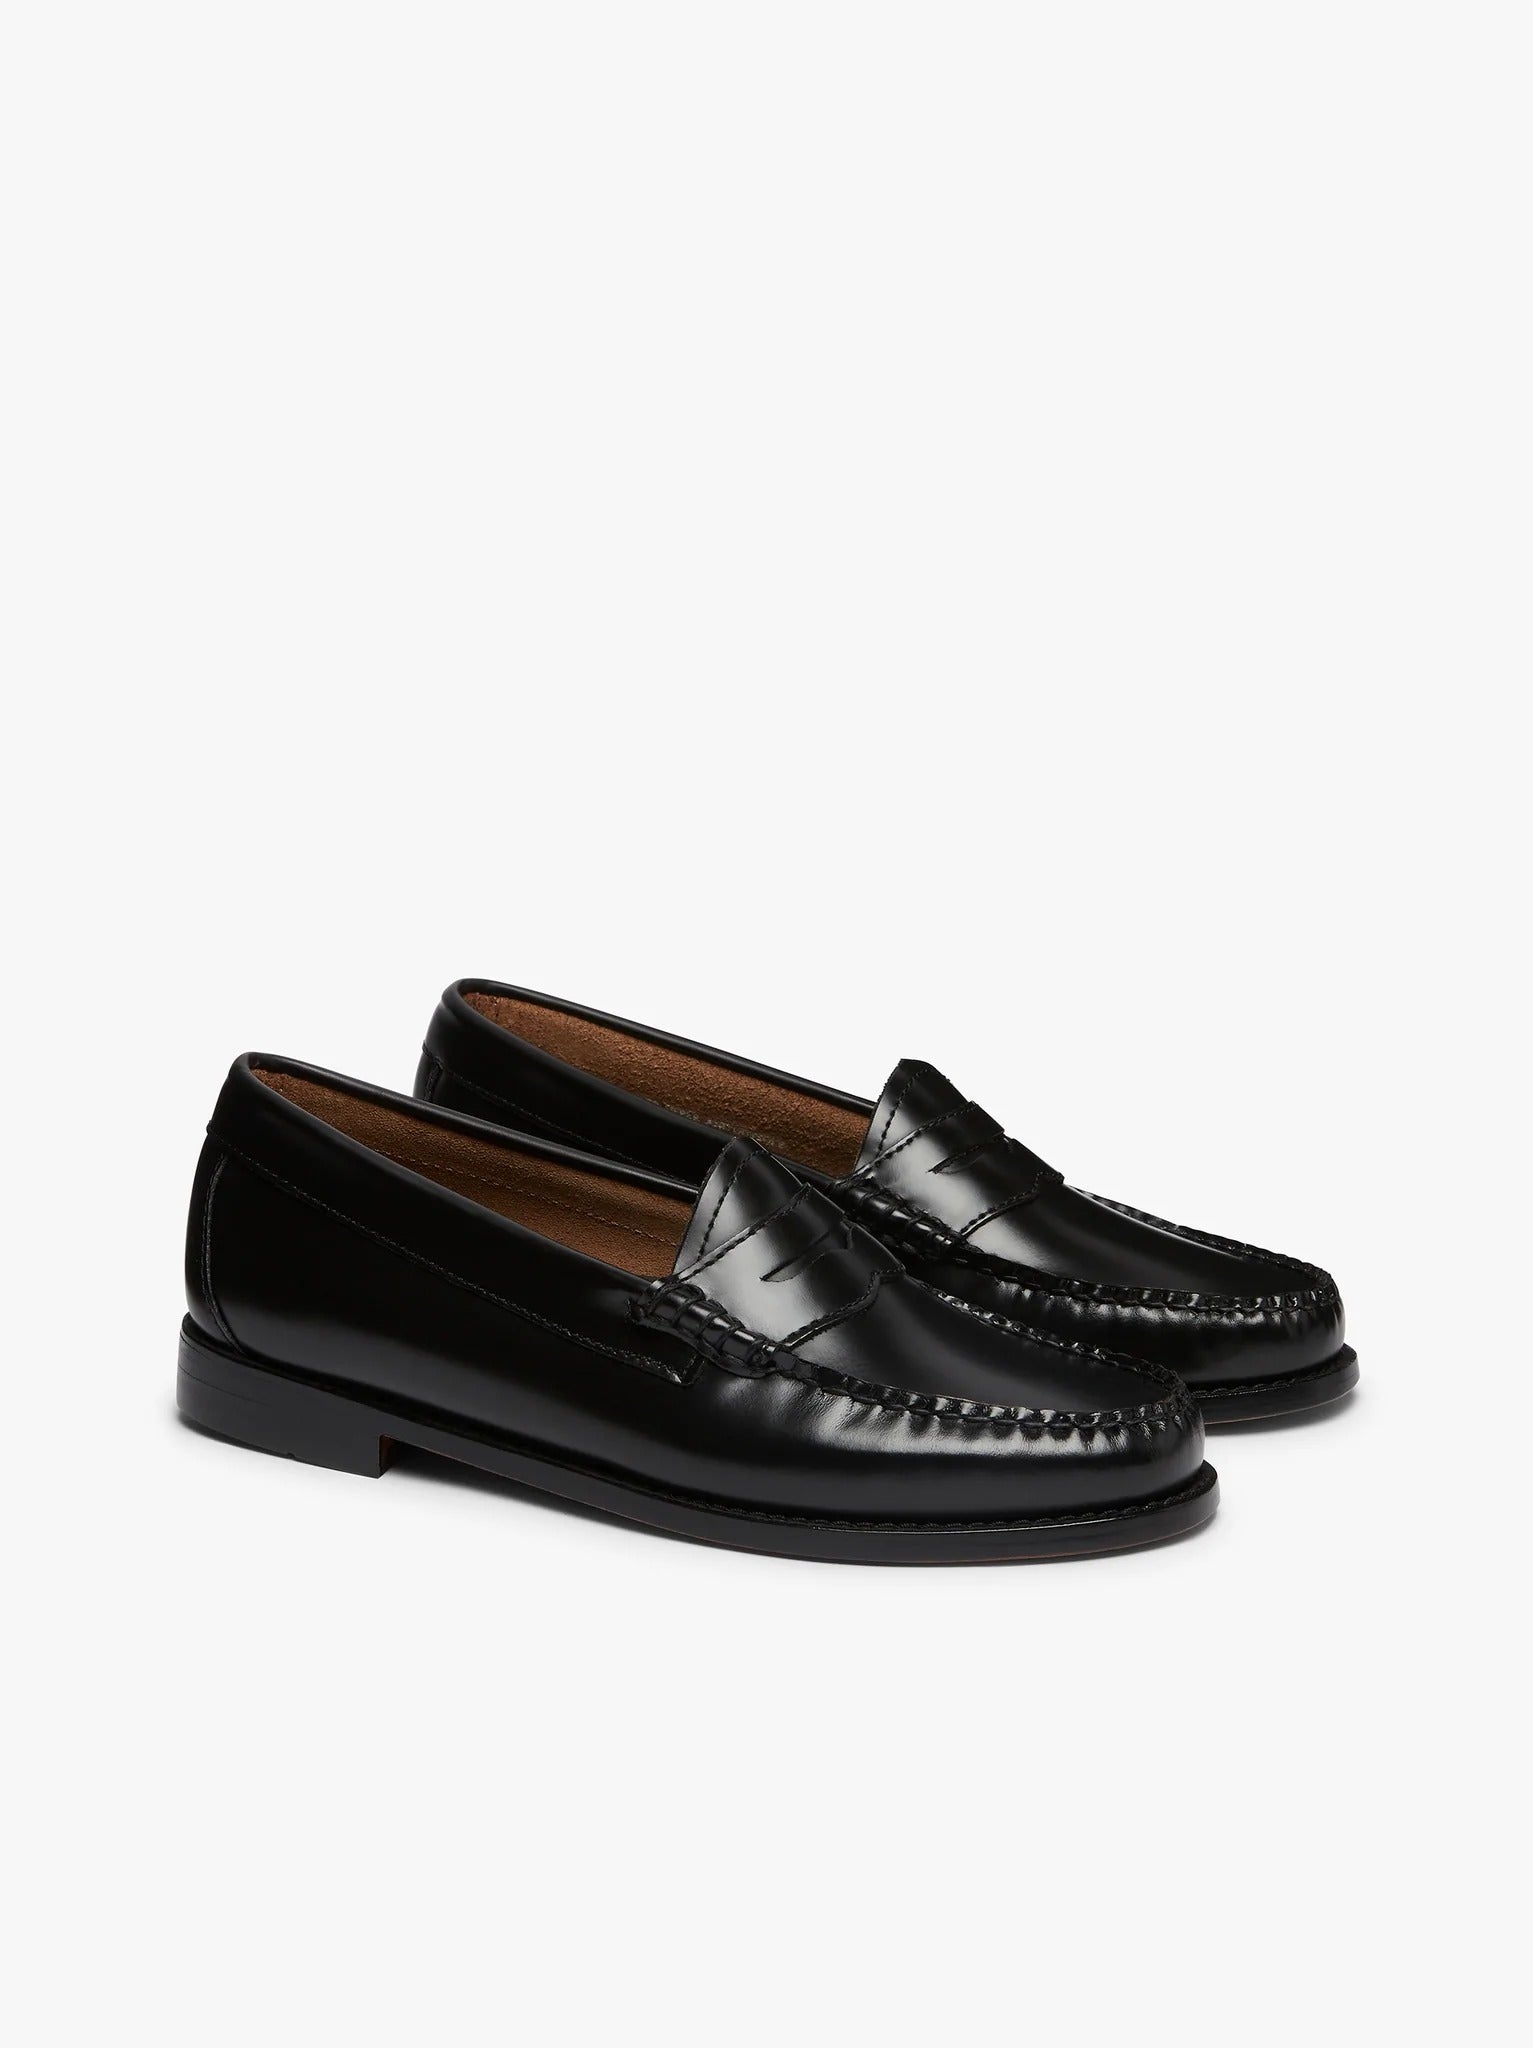 G.H.Bass Originals + Weejuns Penny Loafers Black Leather